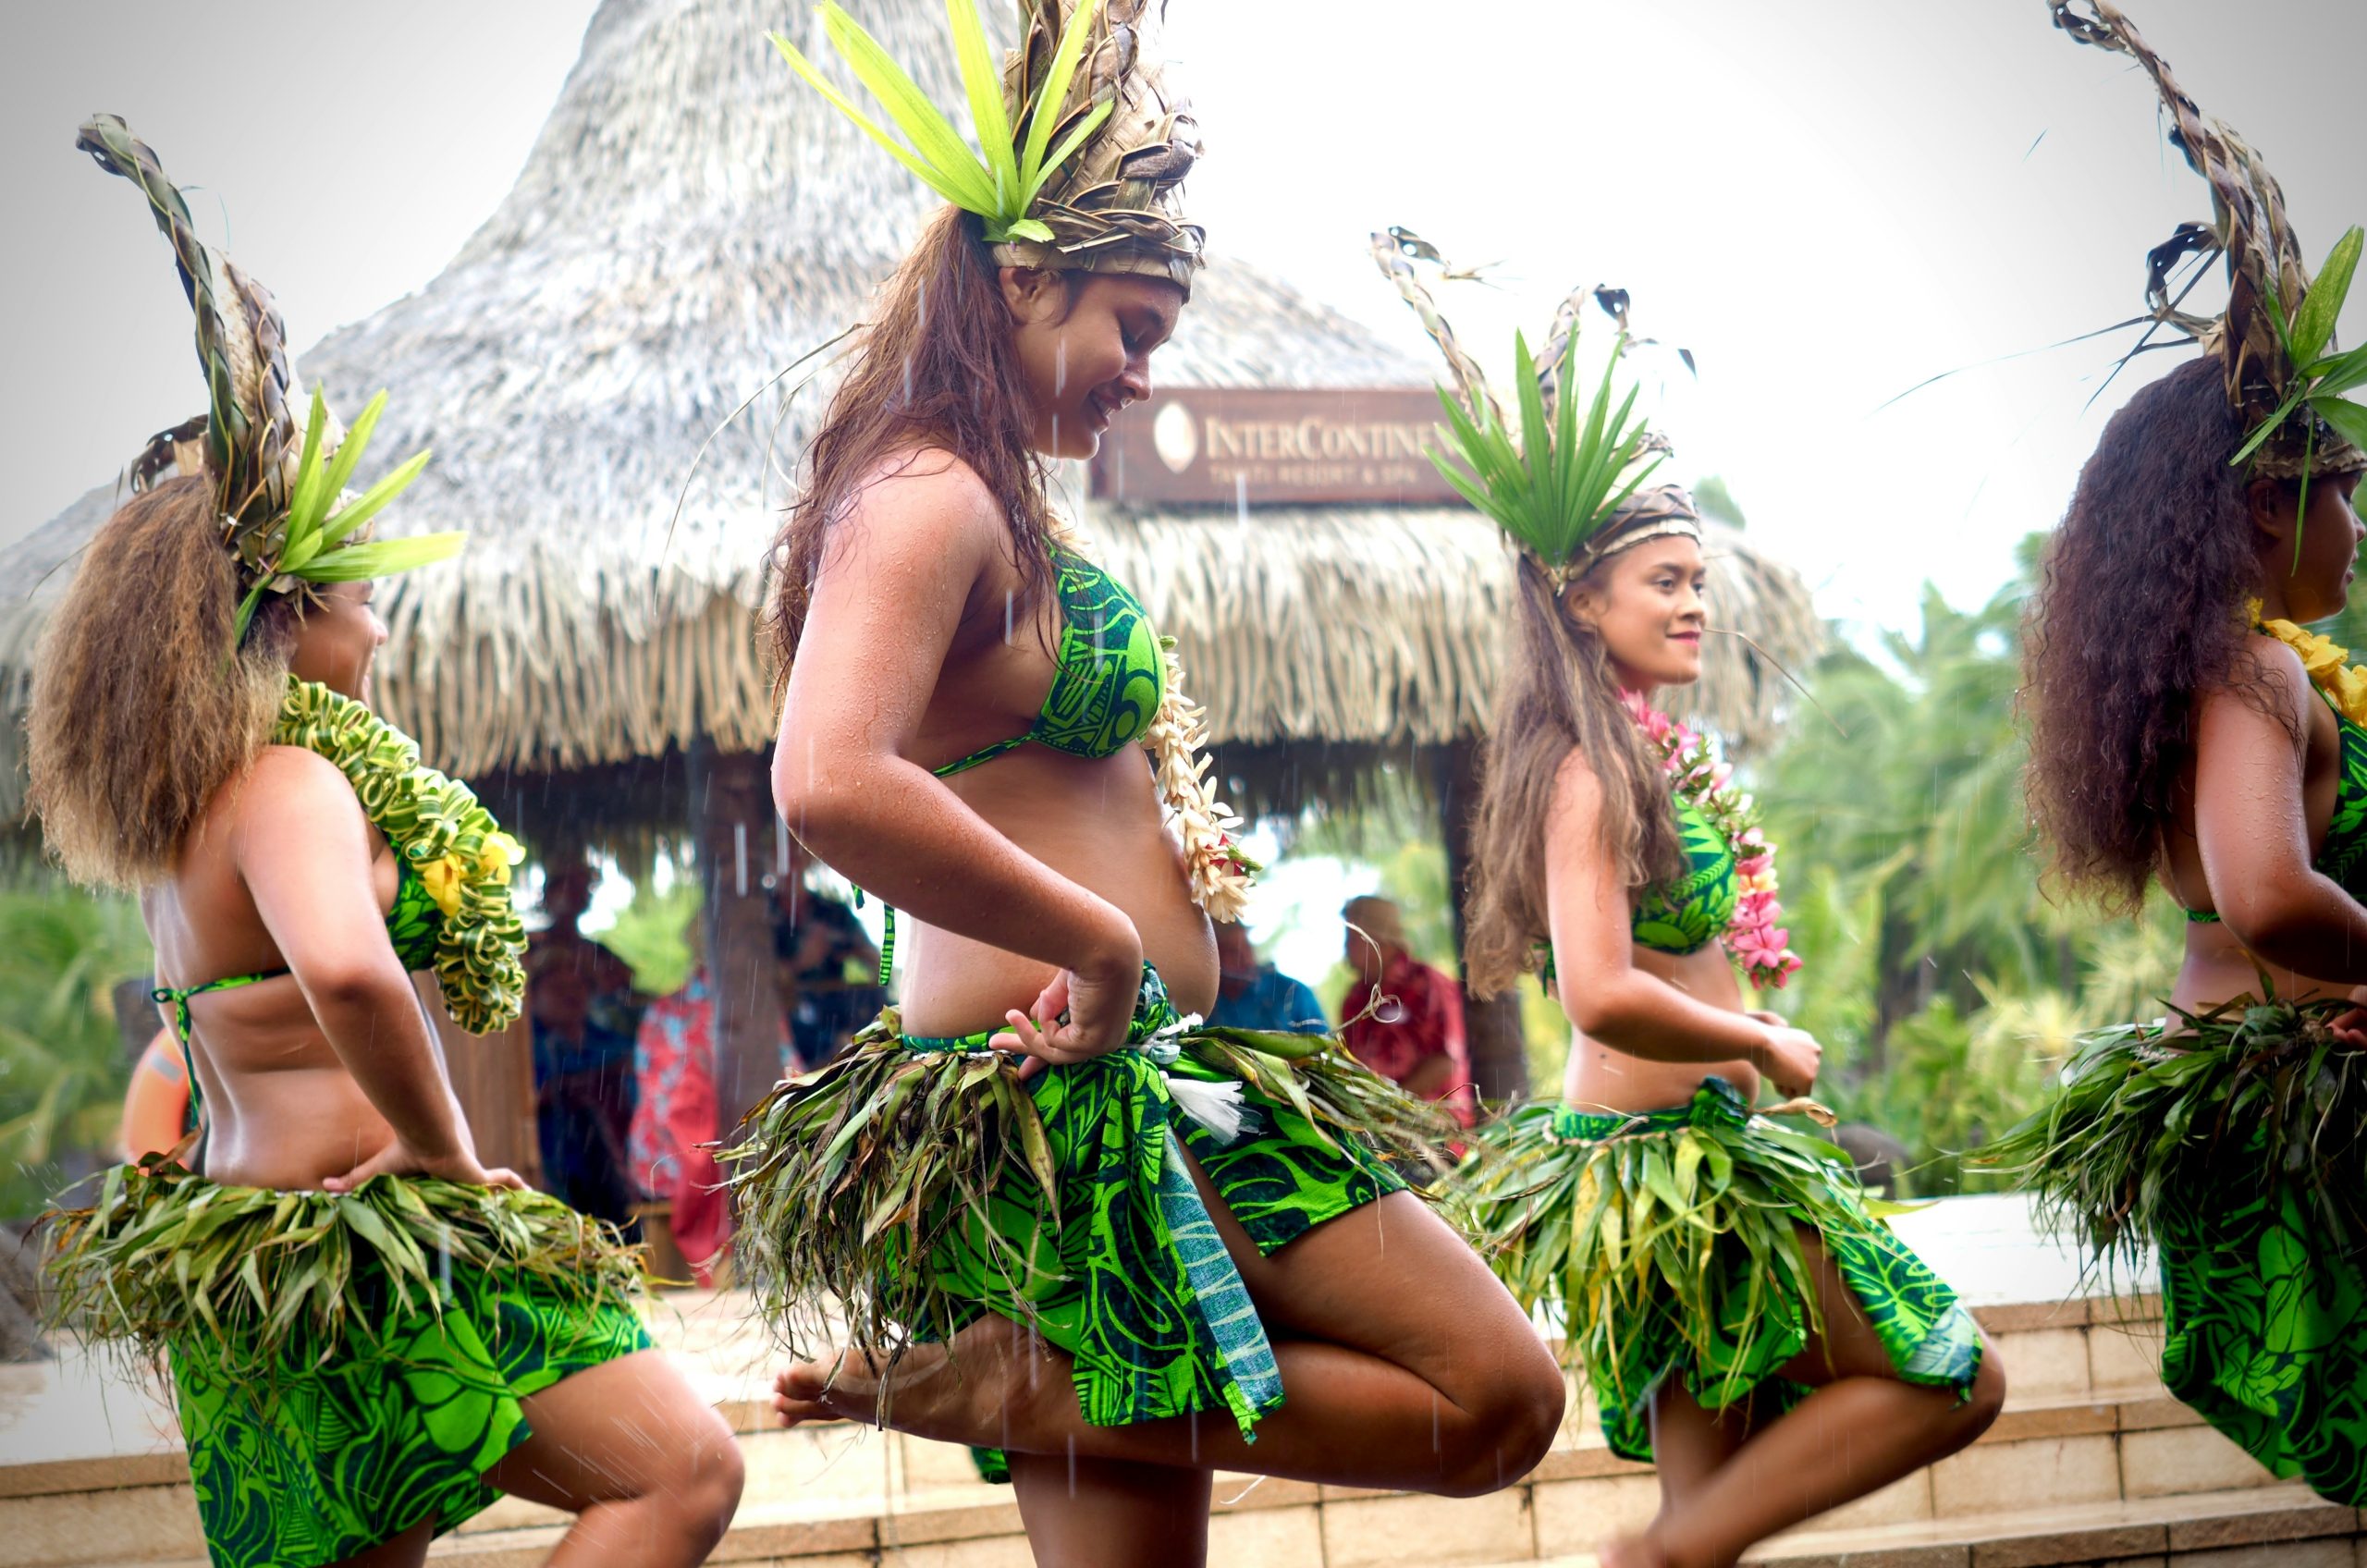 explore the natural beauty and rich cultural heritage of tahiti with tahiti tourism. plan your perfect island getaway, from pristine beaches to lush mountain landscapes, and immerse yourself in the warmth of polynesian hospitality.